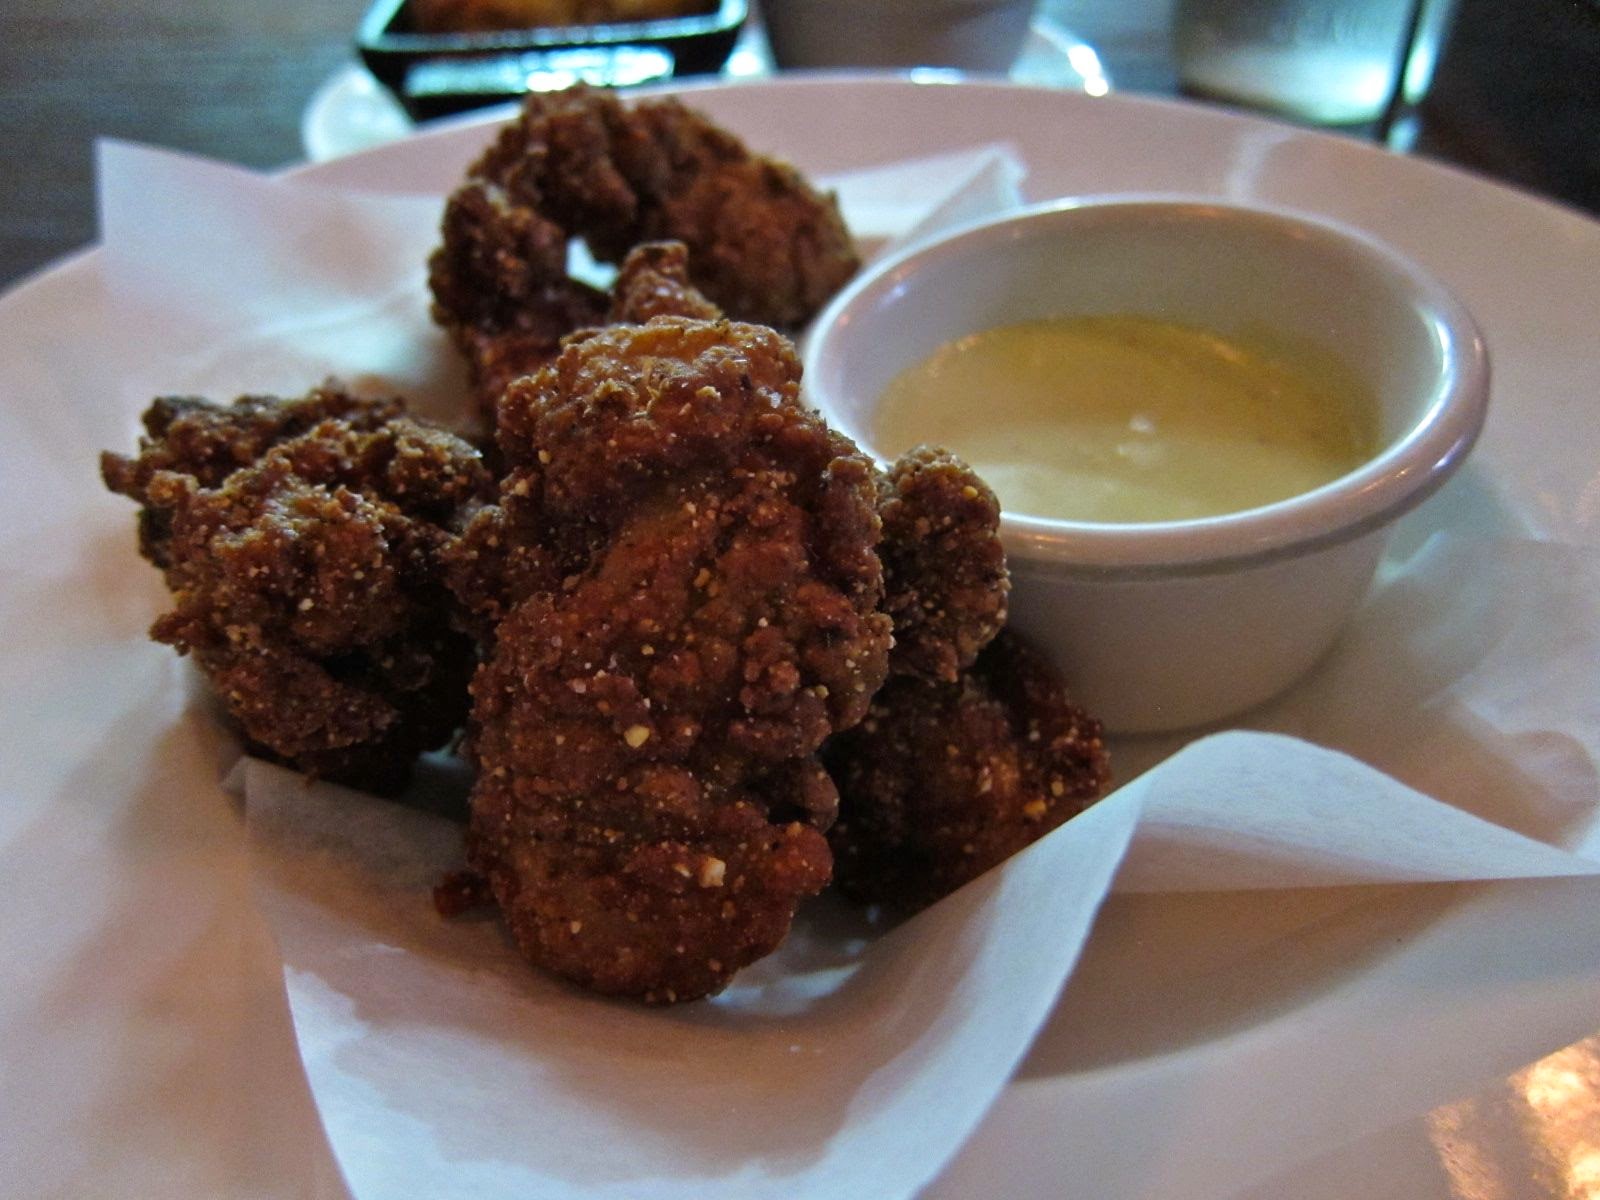 Fried Oysters at Hops & Hominy, SF